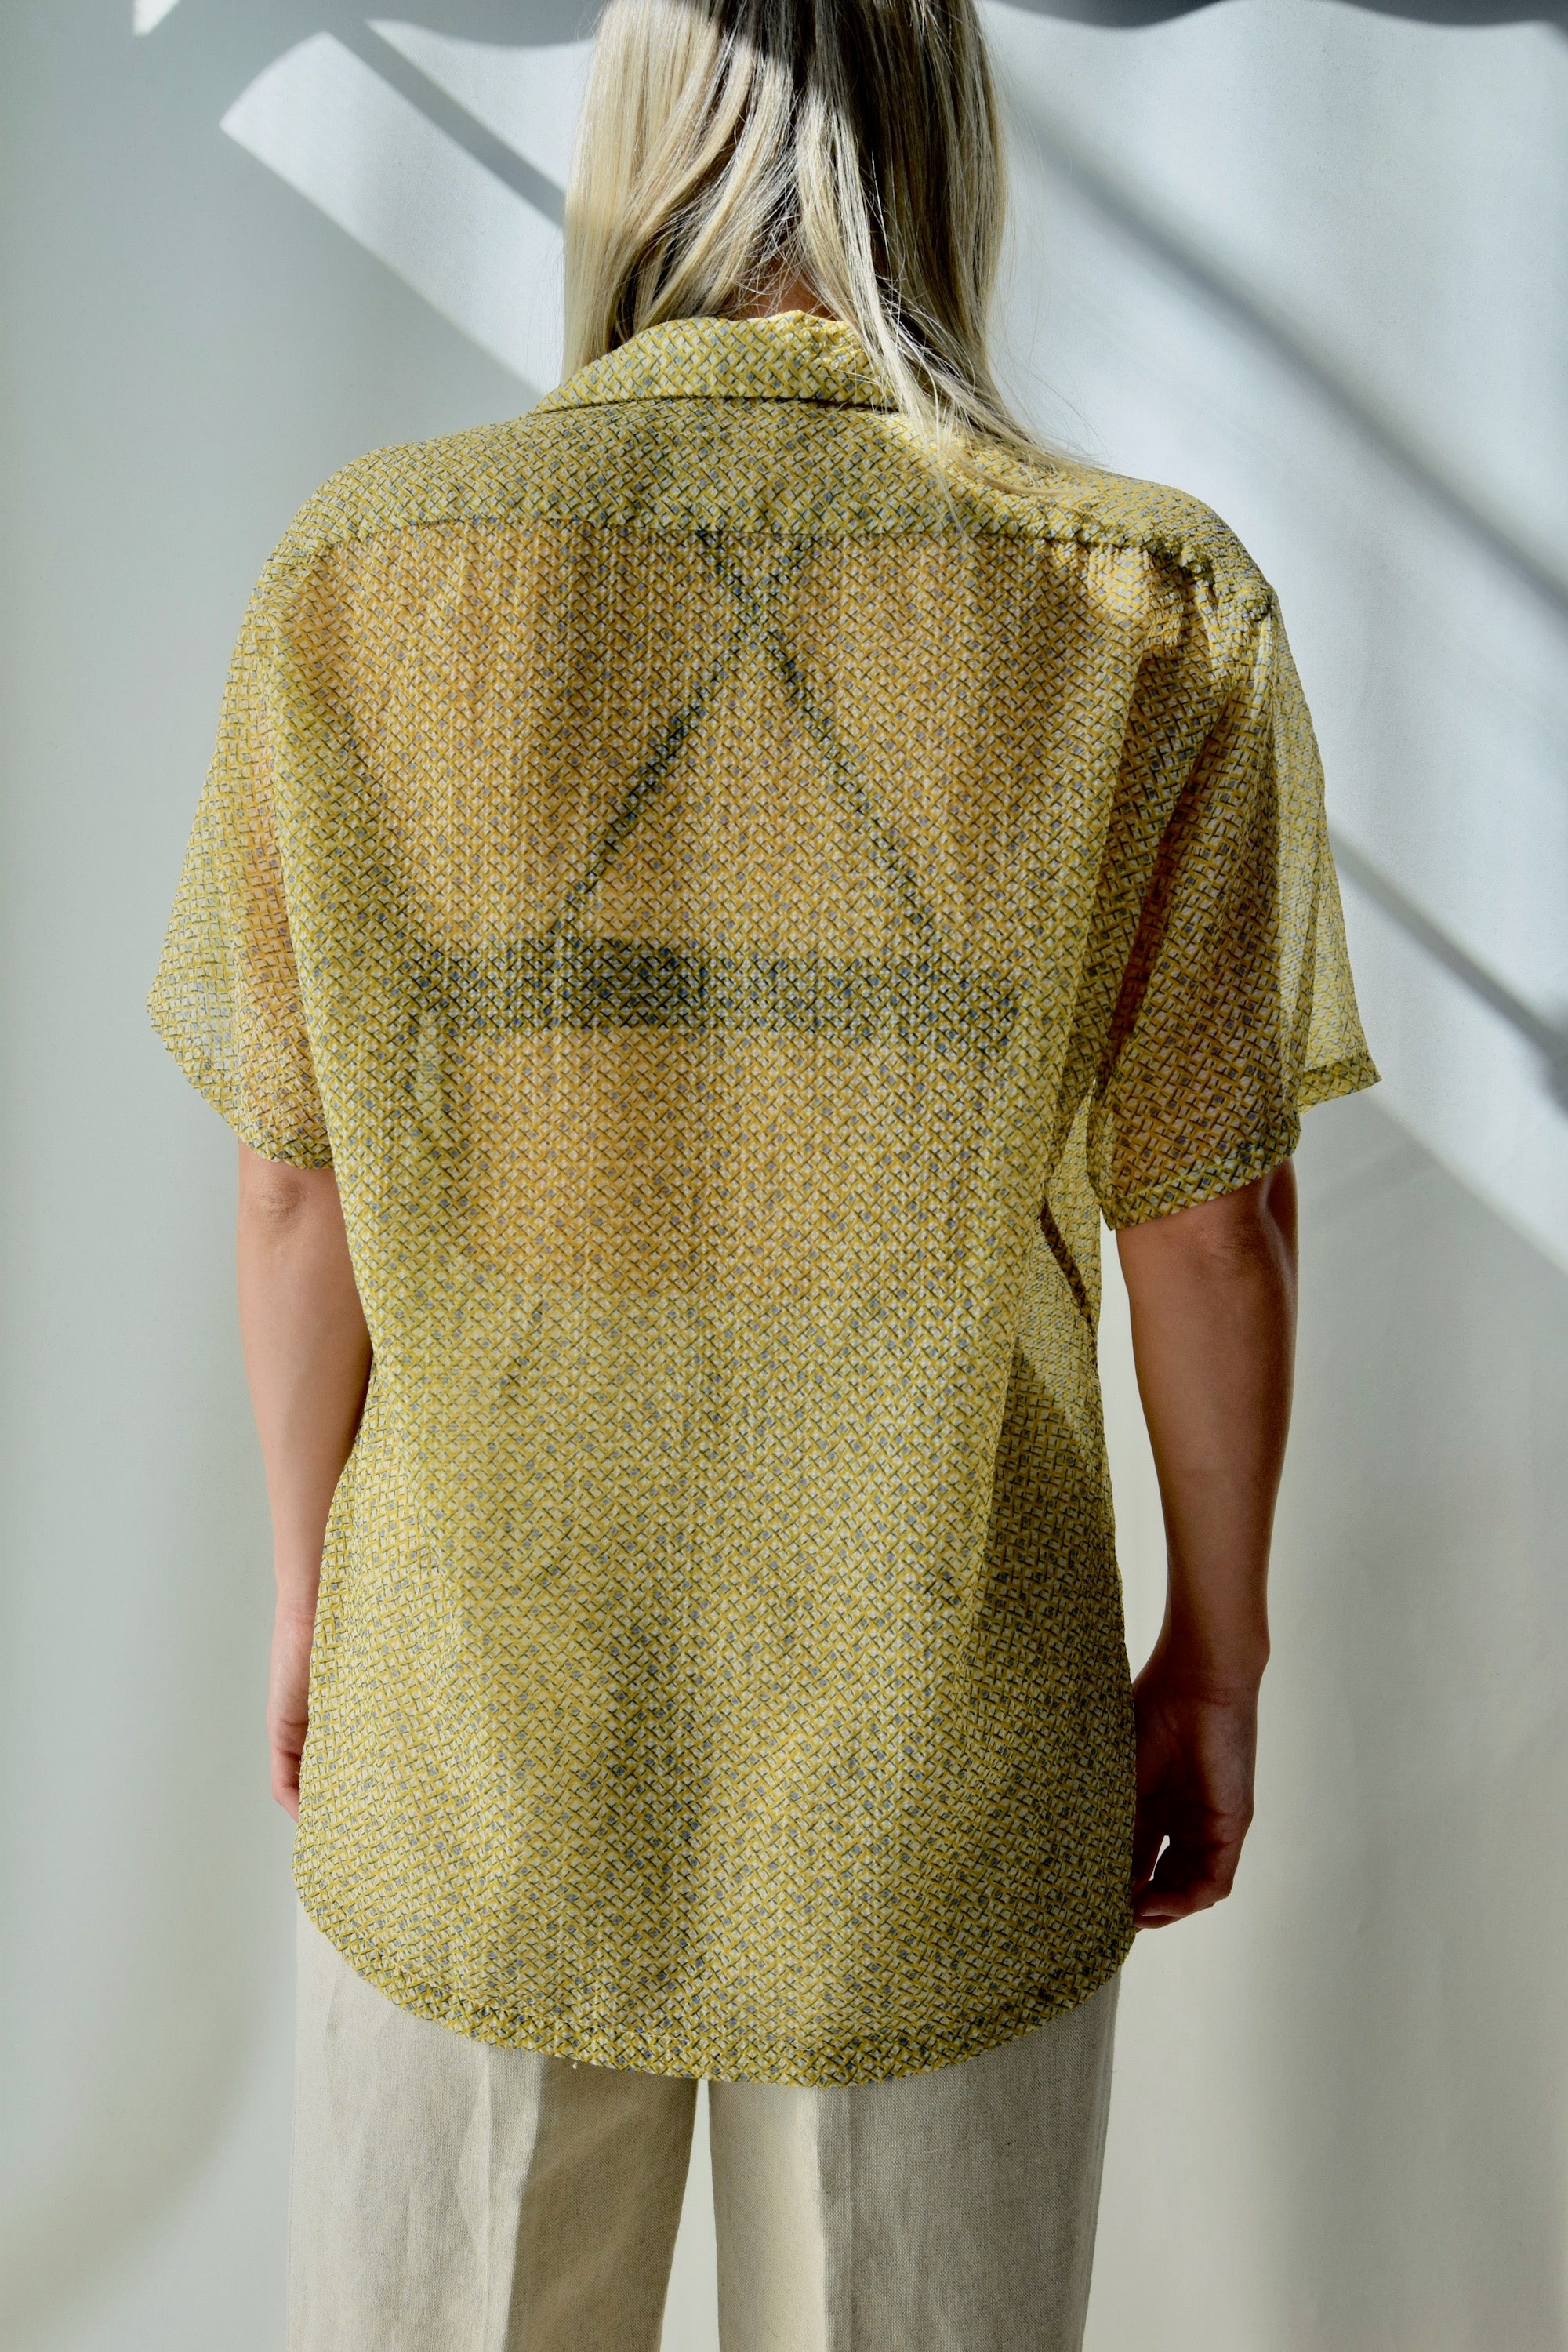 1950's Pebbled Buttercup Sheer Mens Button Up